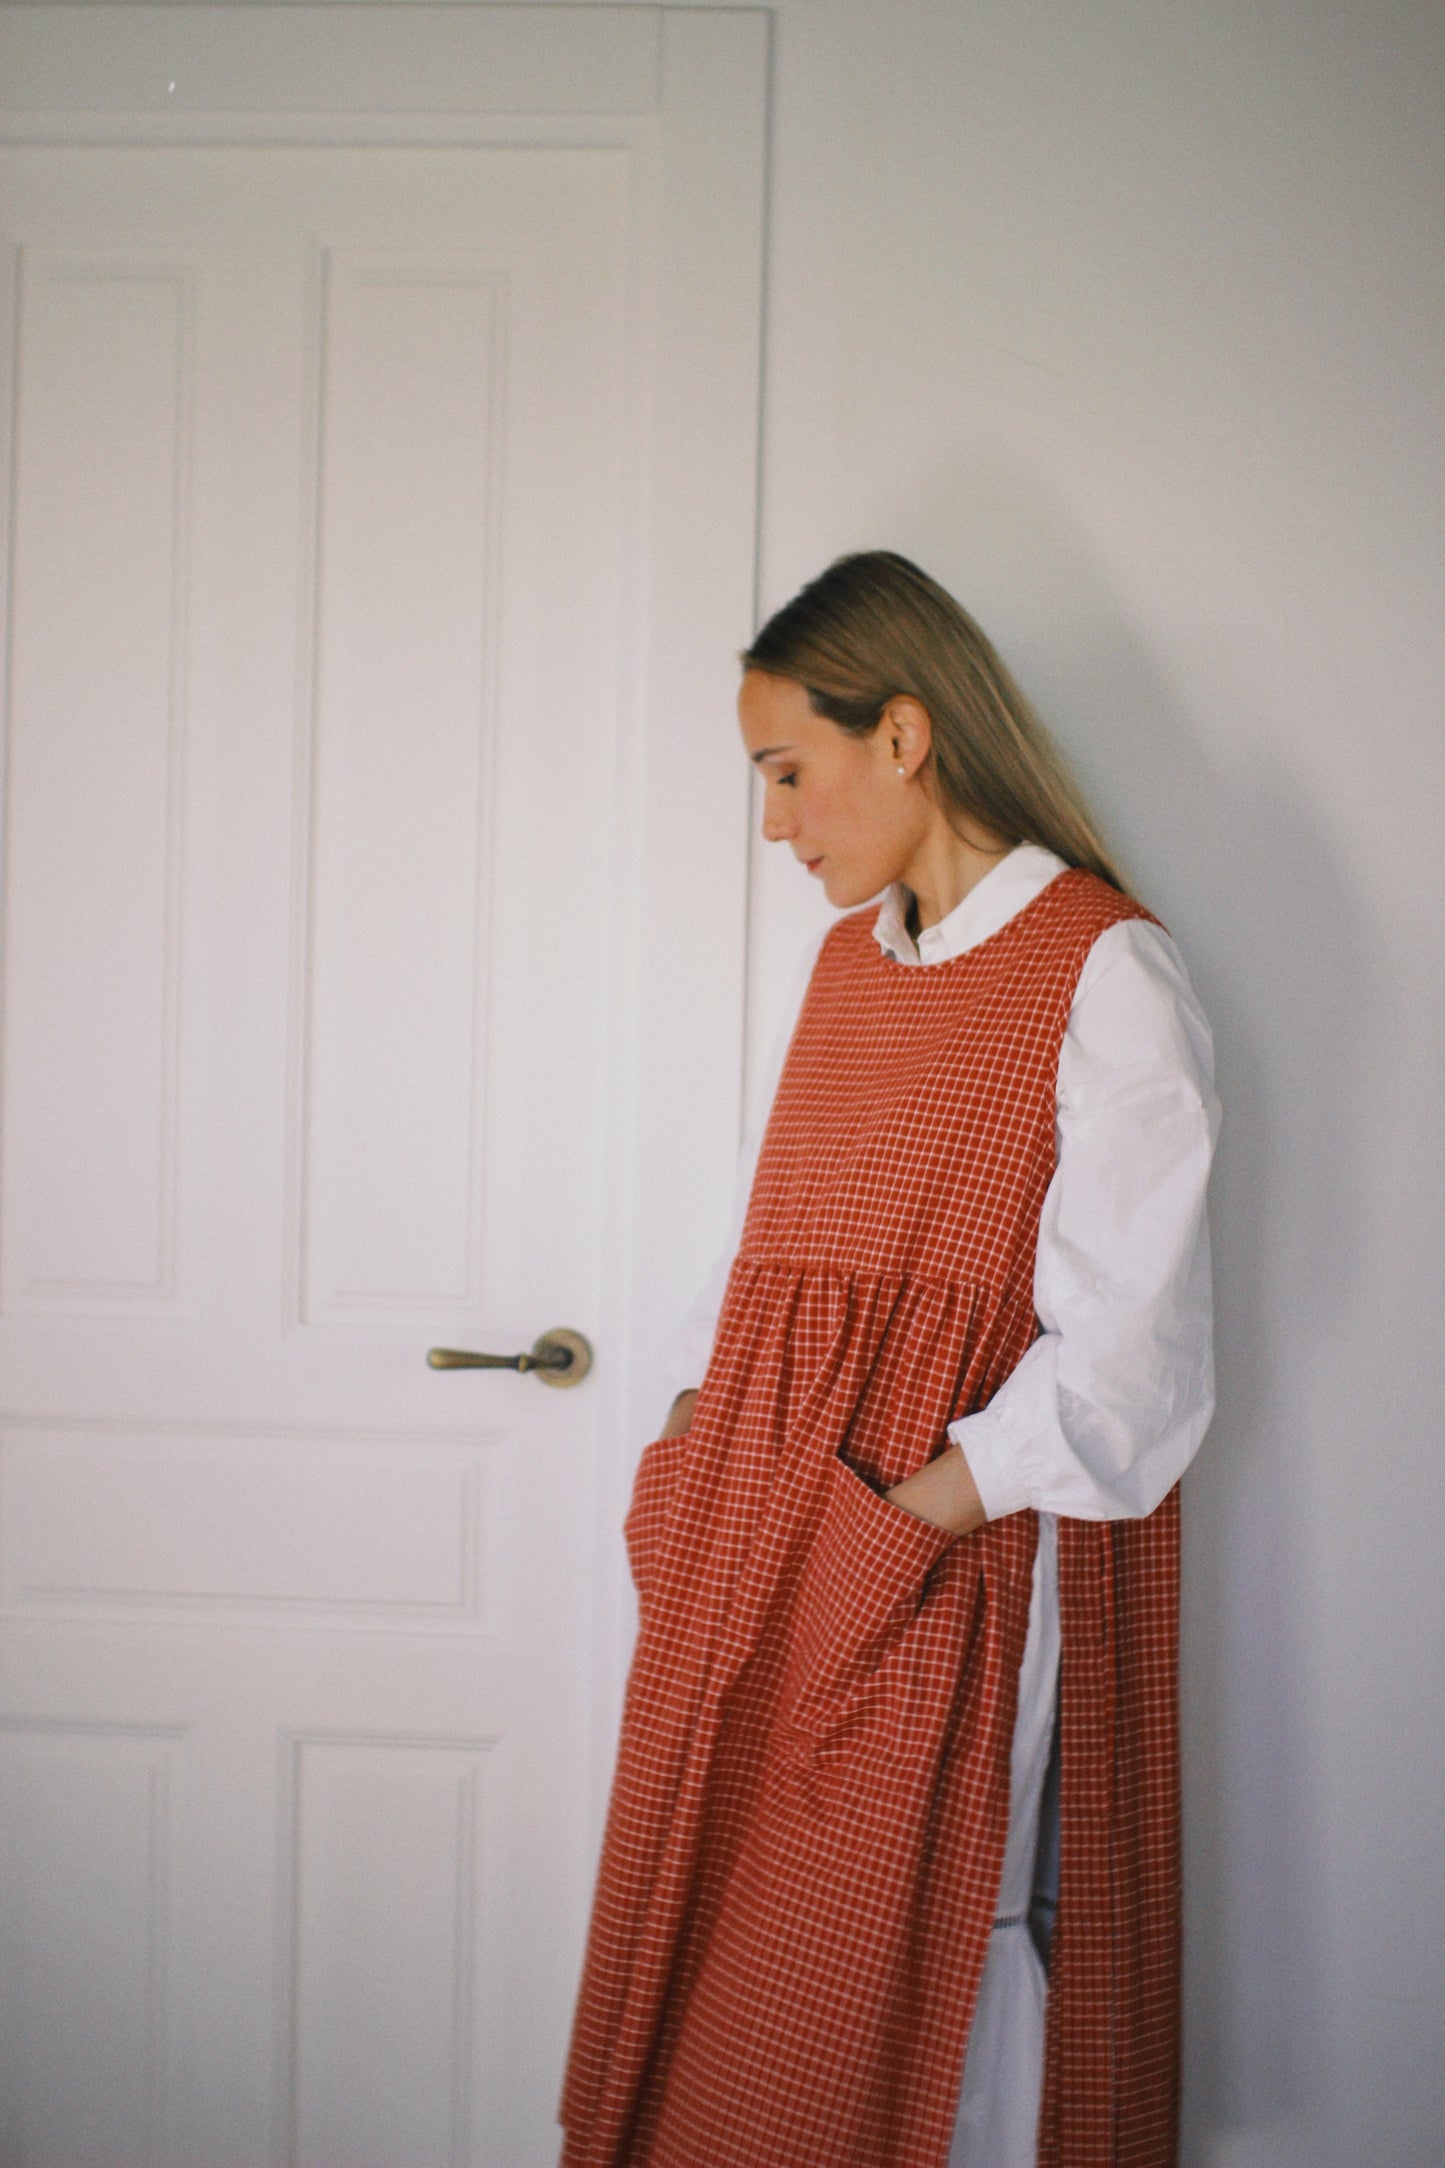 RED CHECKED COTTON APRON WITH BOW